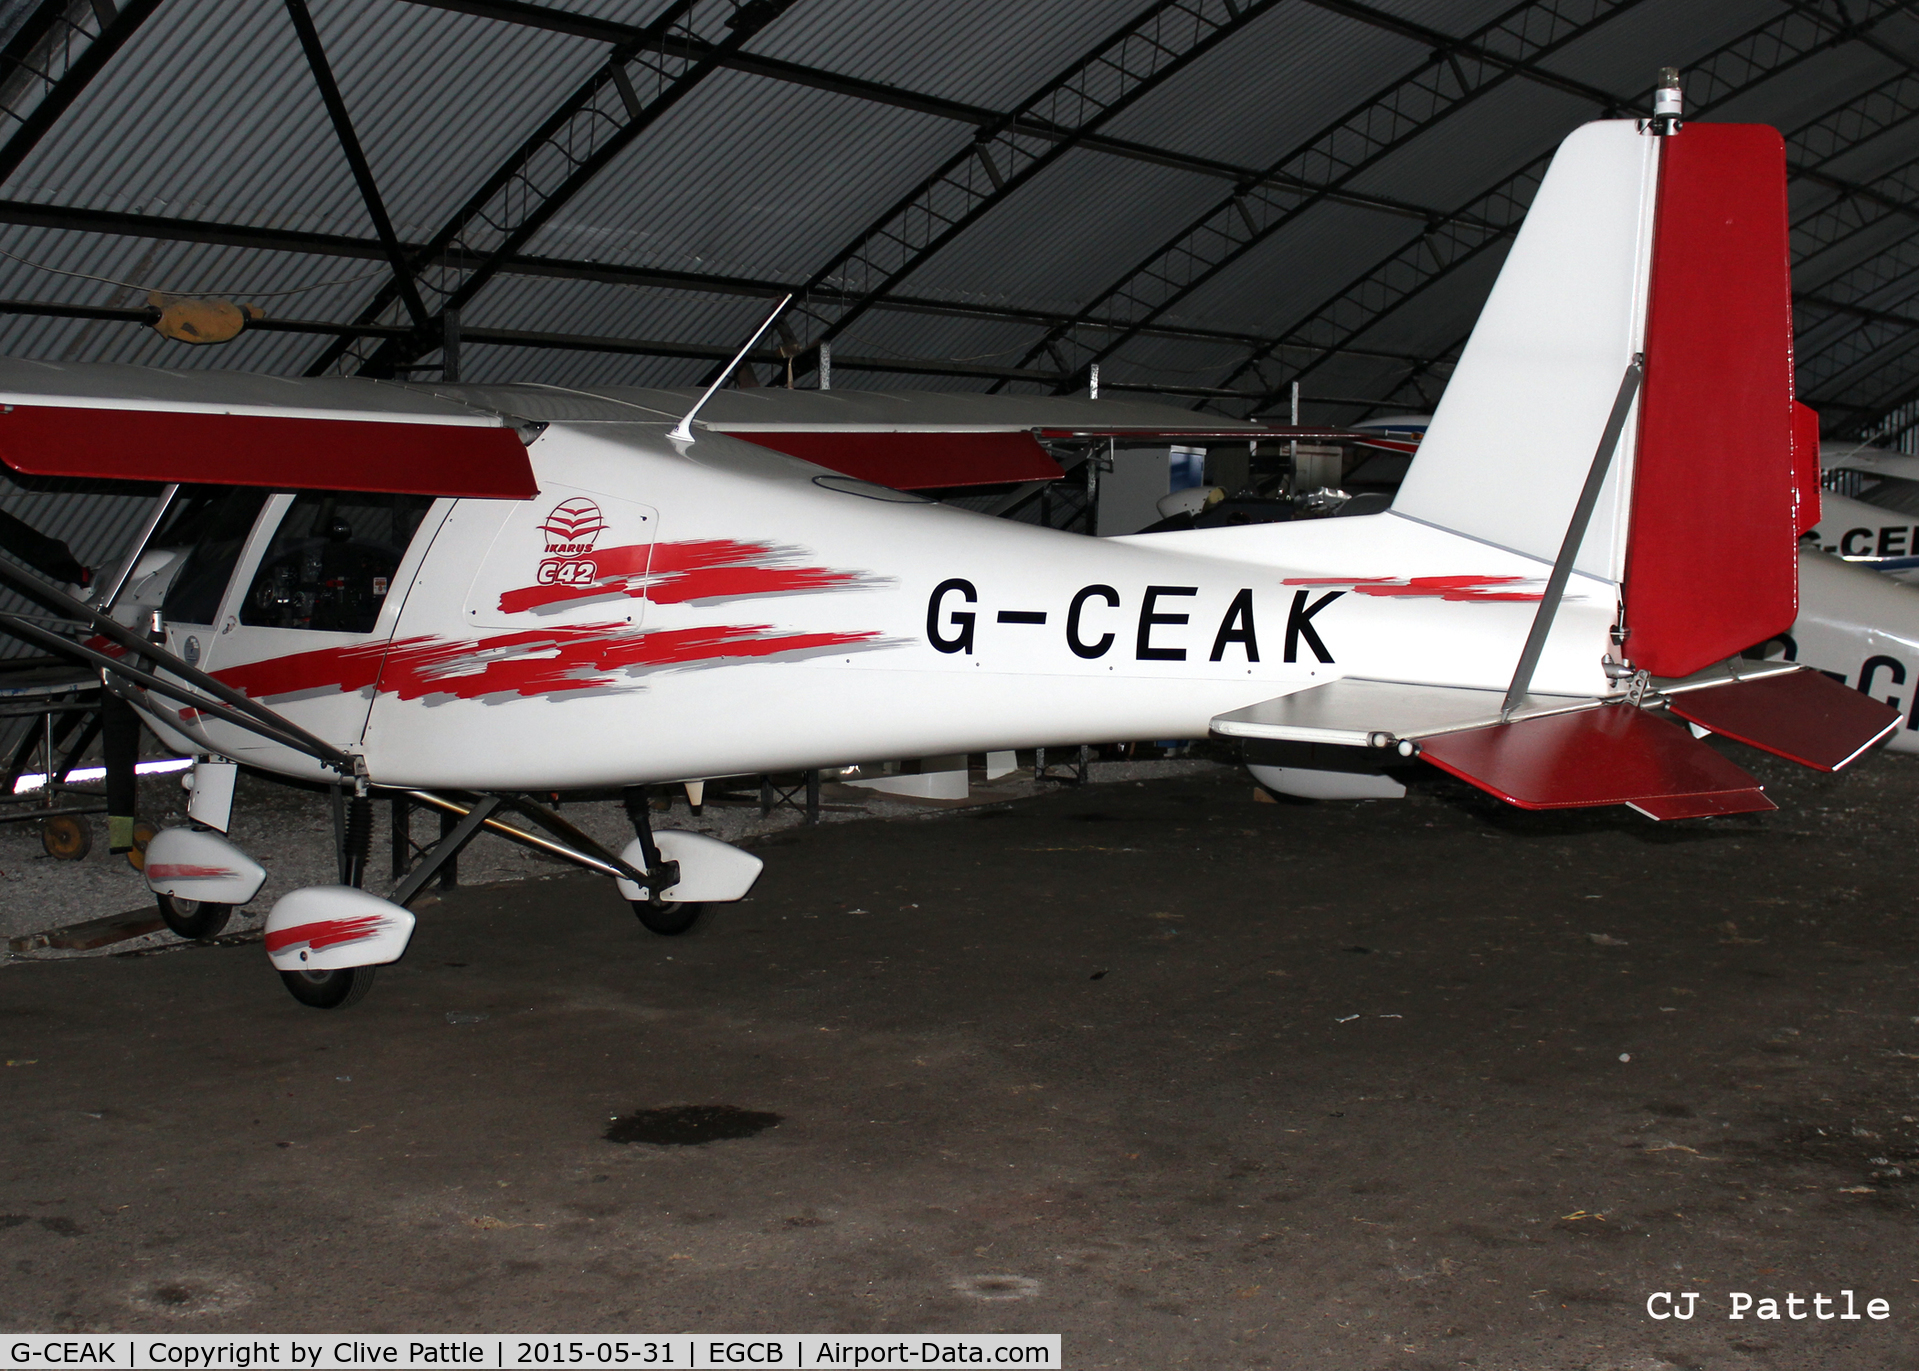 G-CEAK, 2006 Comco Ikarus C42 FB80 C/N 0606-6826, Hangared at Barton airfield, Manchester - EGCB